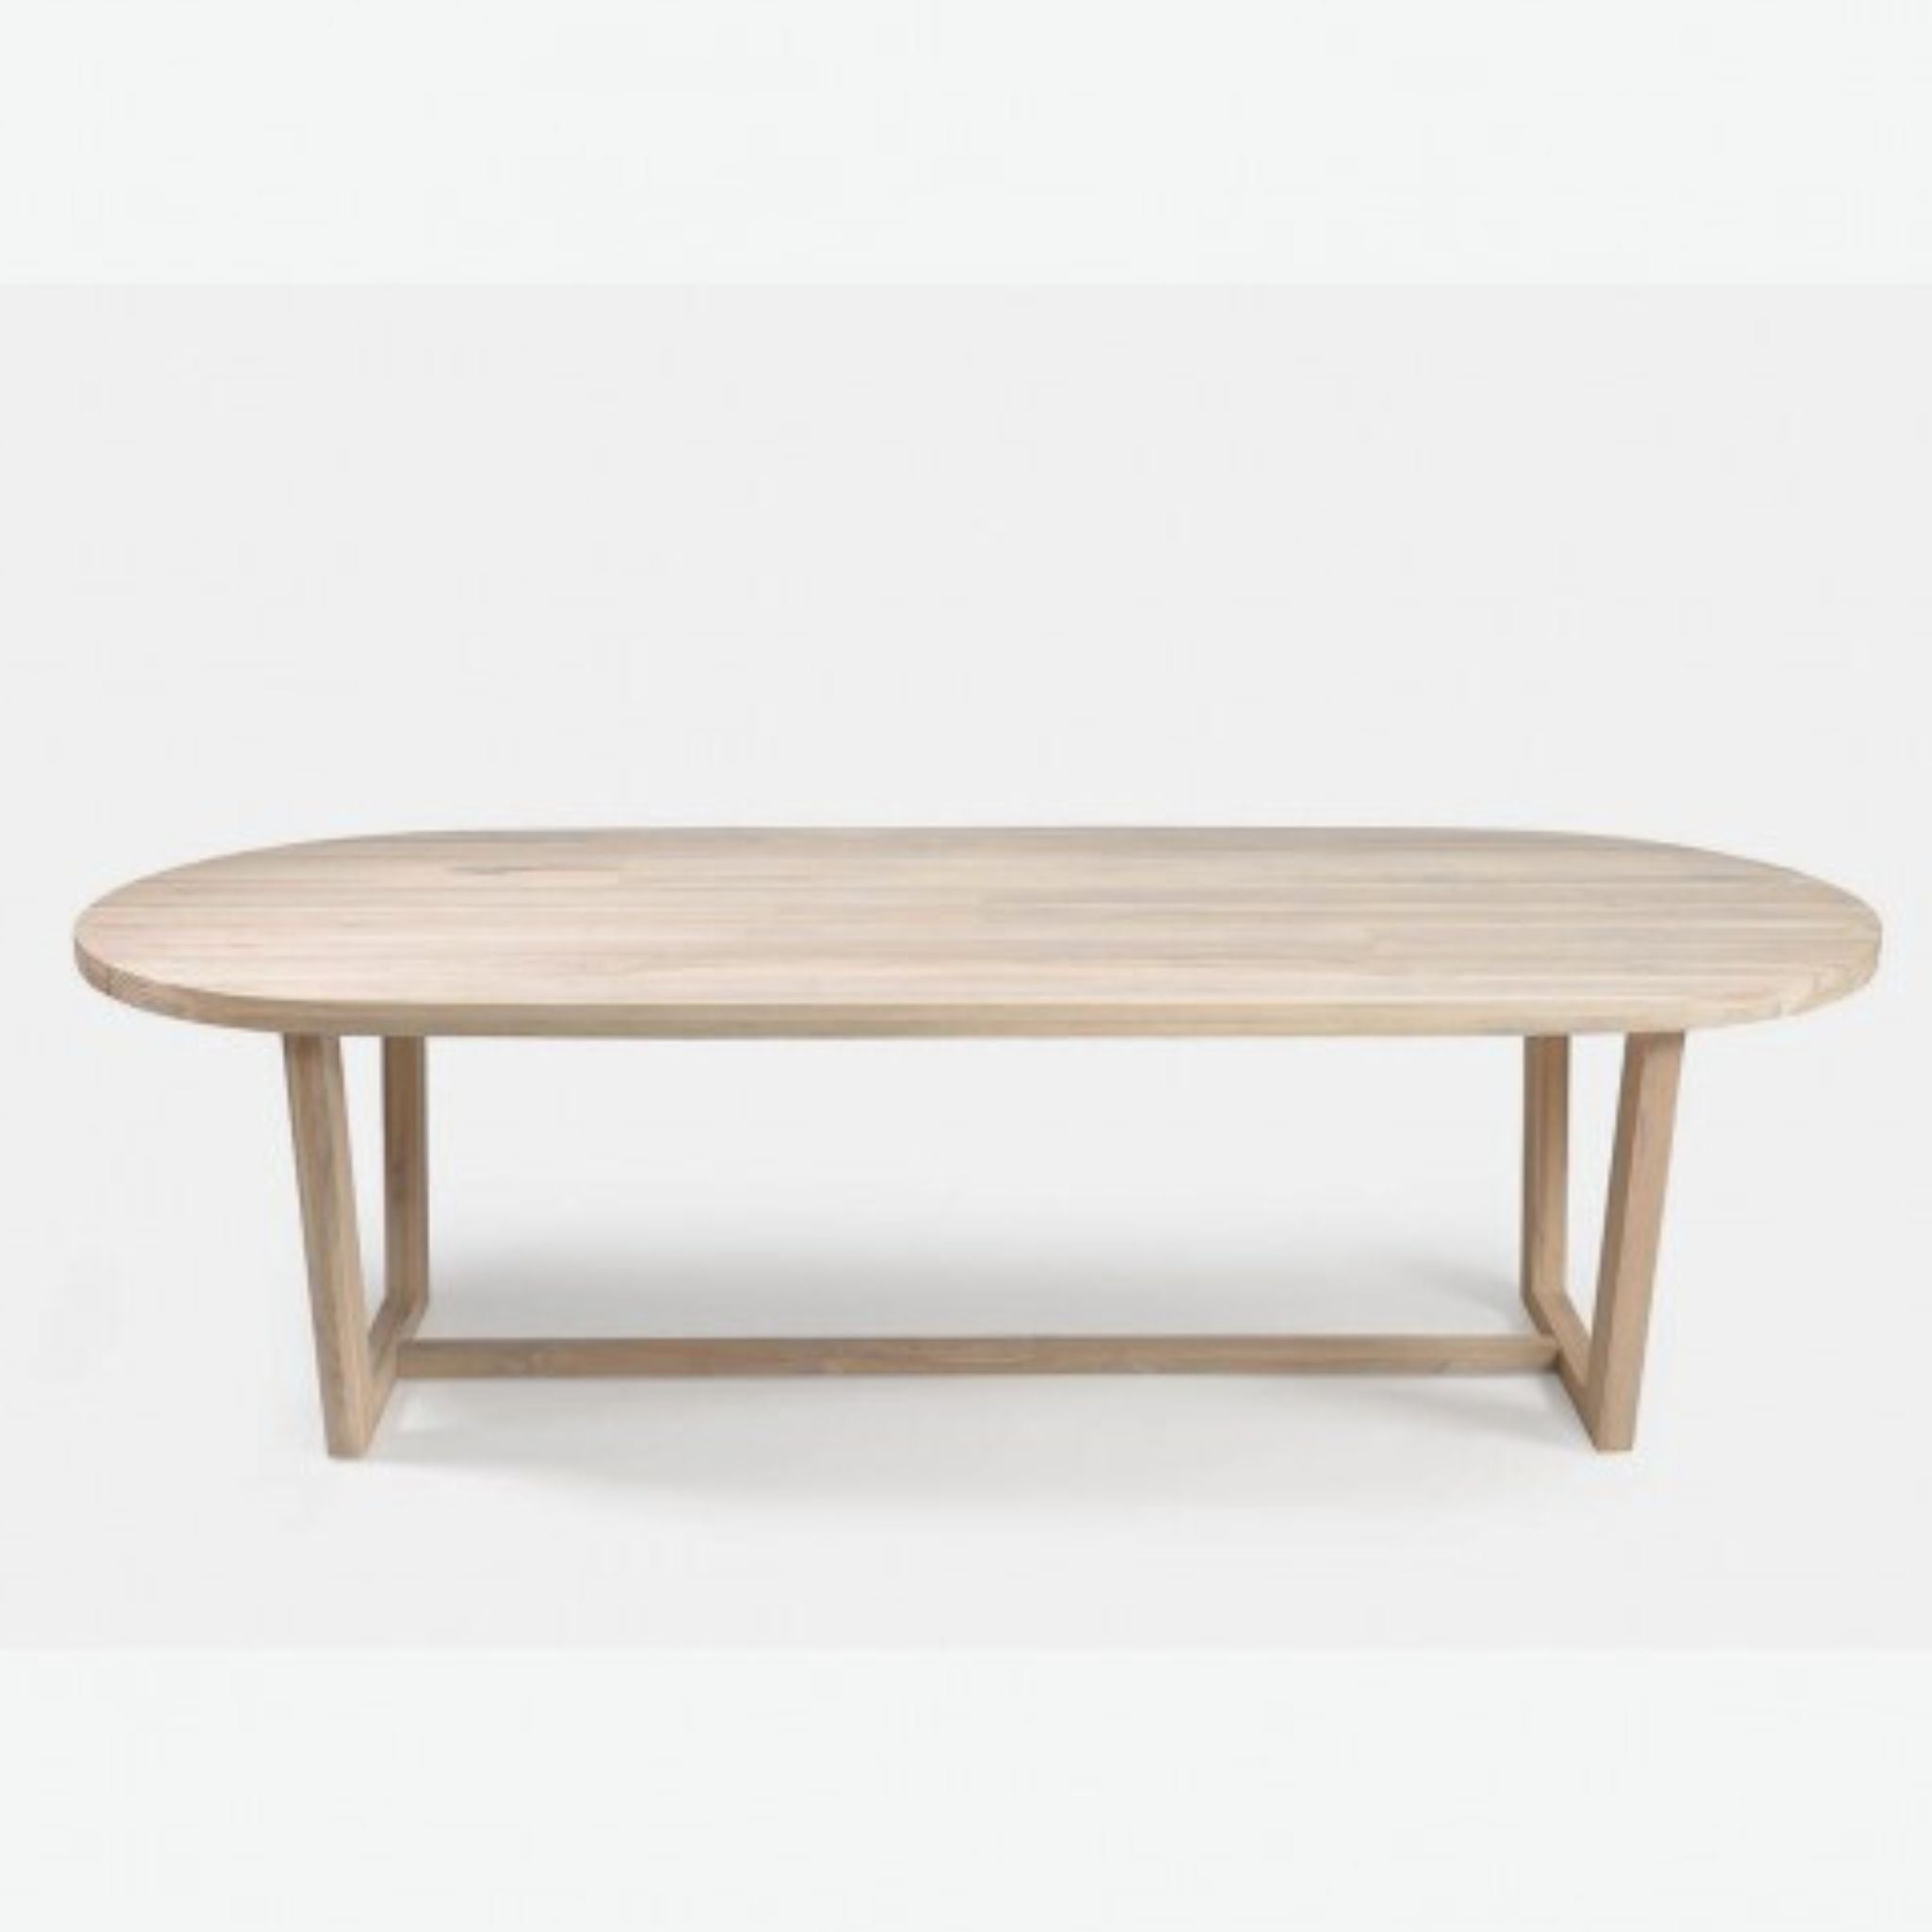 Crisal Decoracion Tika Wooden Oval Outdoor Table with Wooden Legs Teak Wood - ModernistaLiving